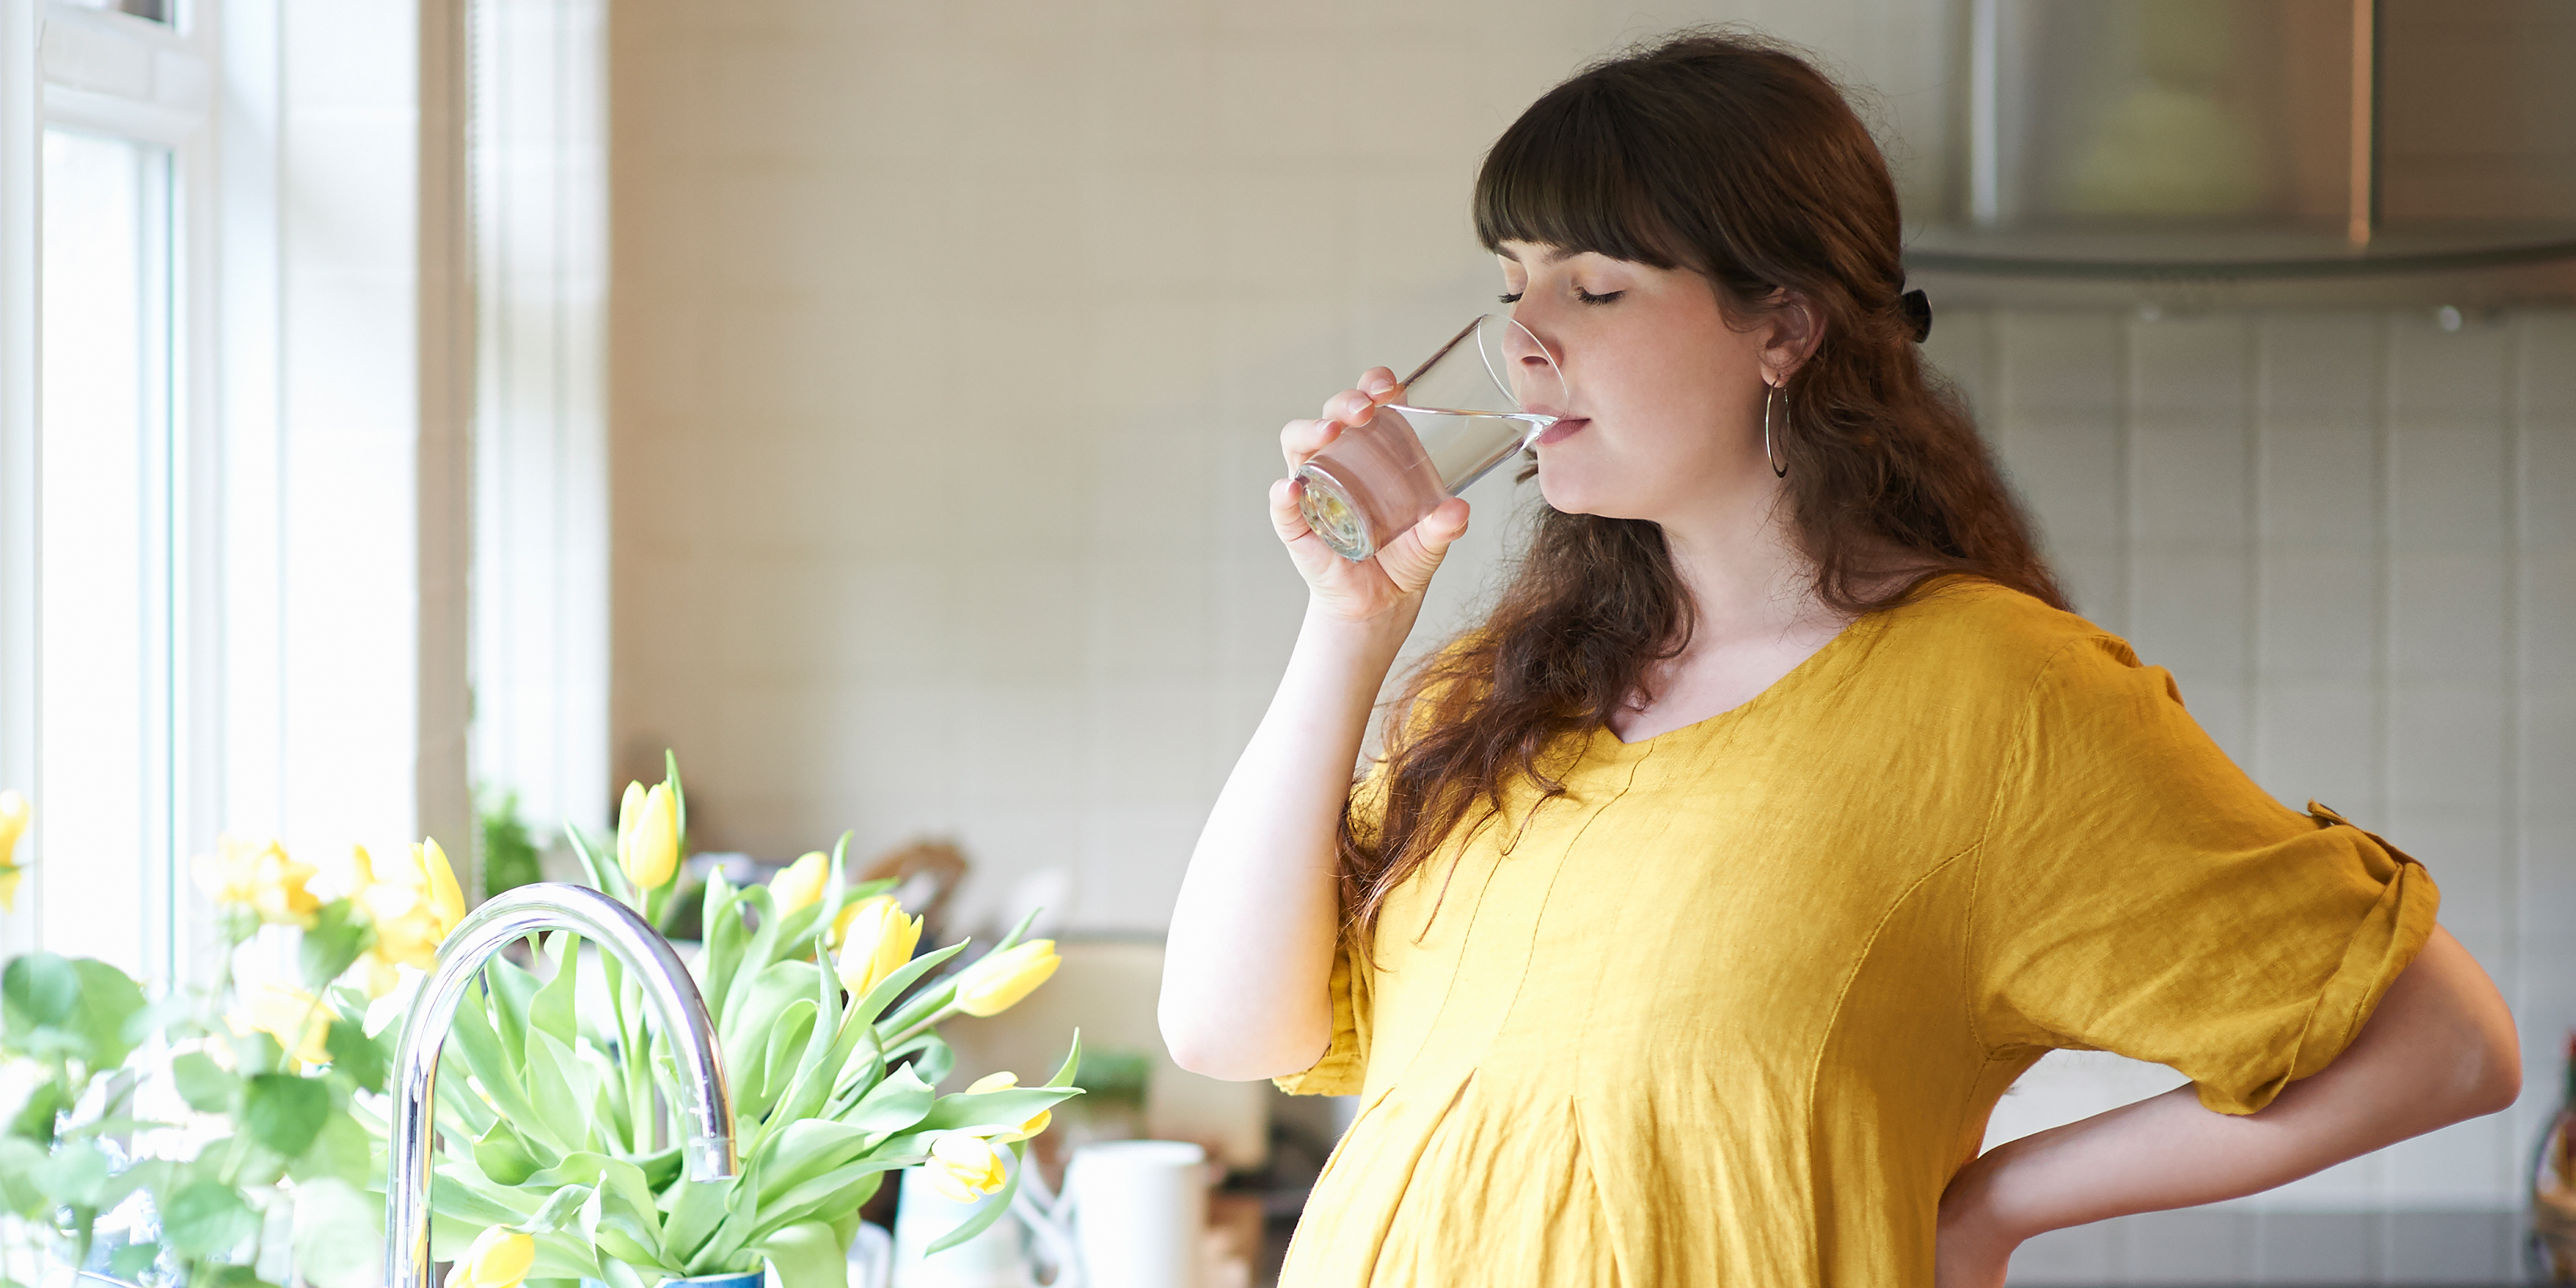 Pregnant woman drinking glass of water in kitchen at home. - stock photo